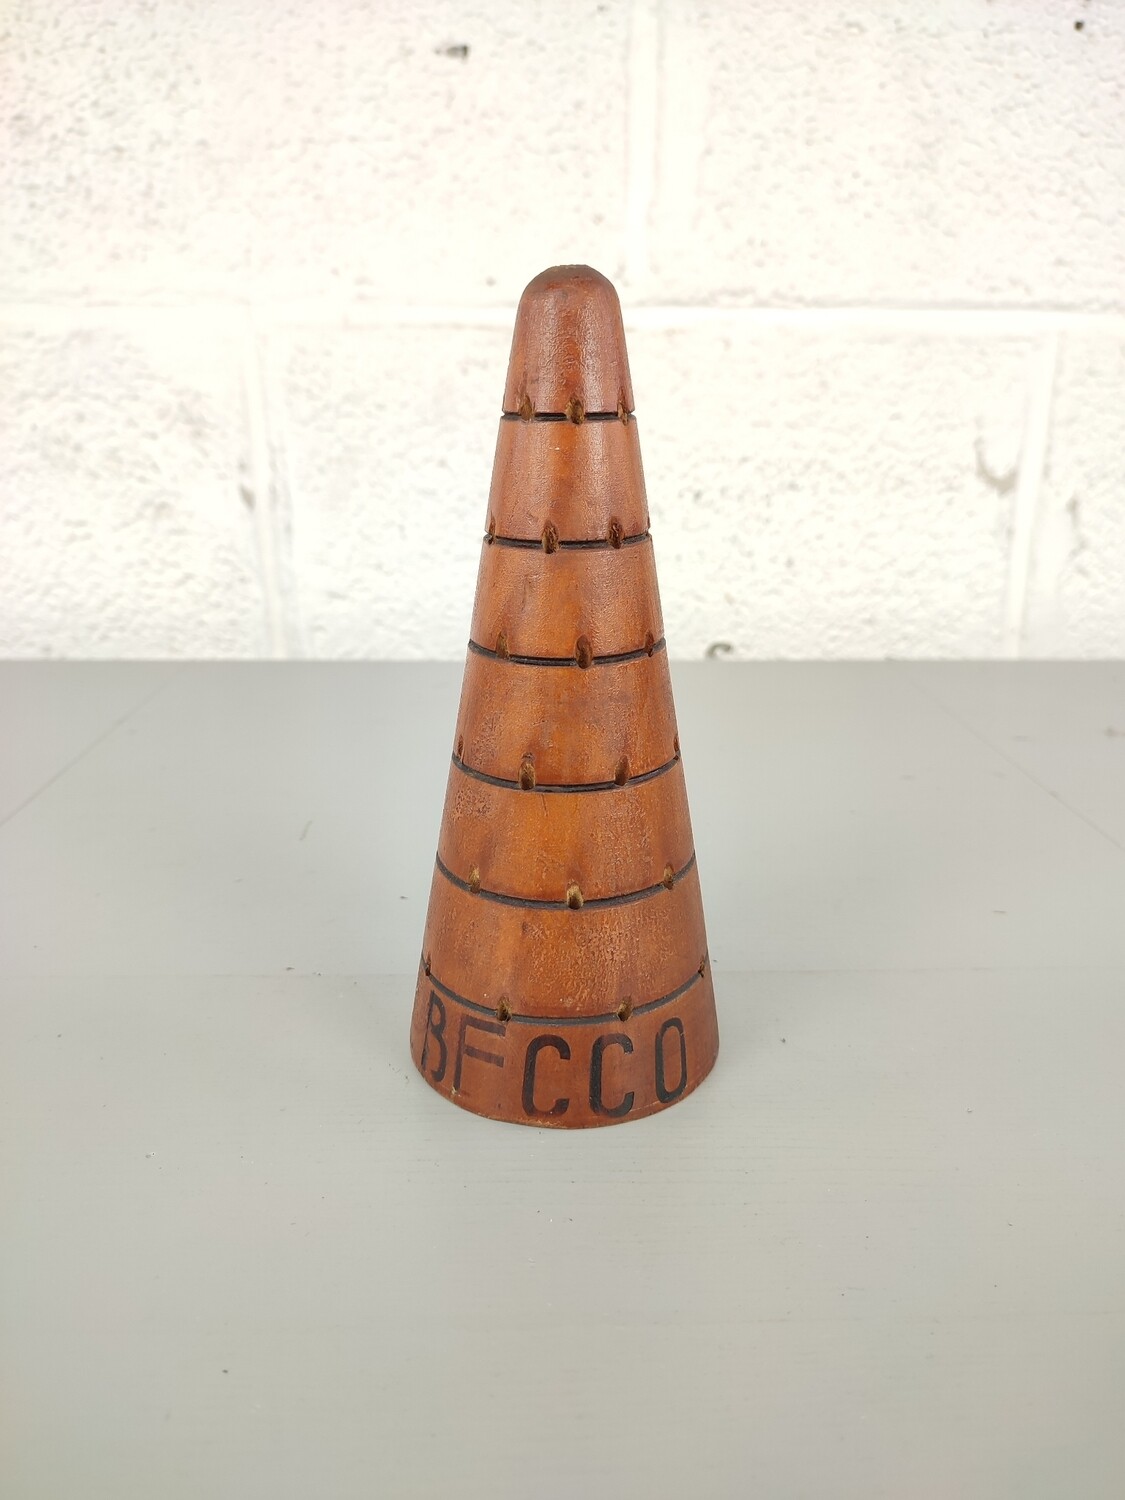 Becco lolly display